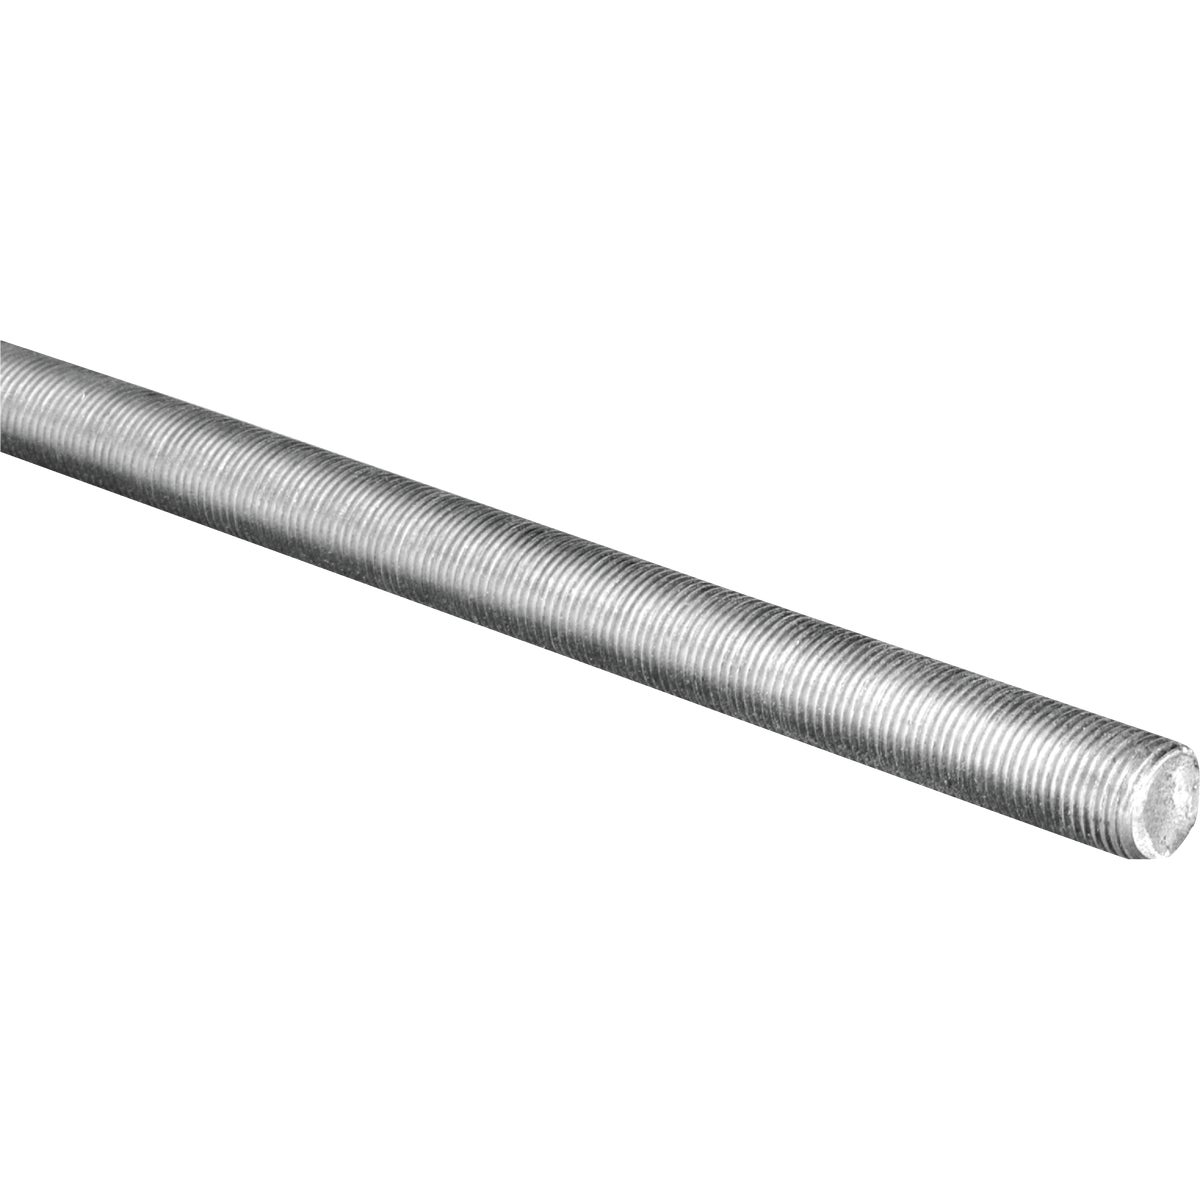 Item 702658, Hot dipped, galvanized threaded, course rod.